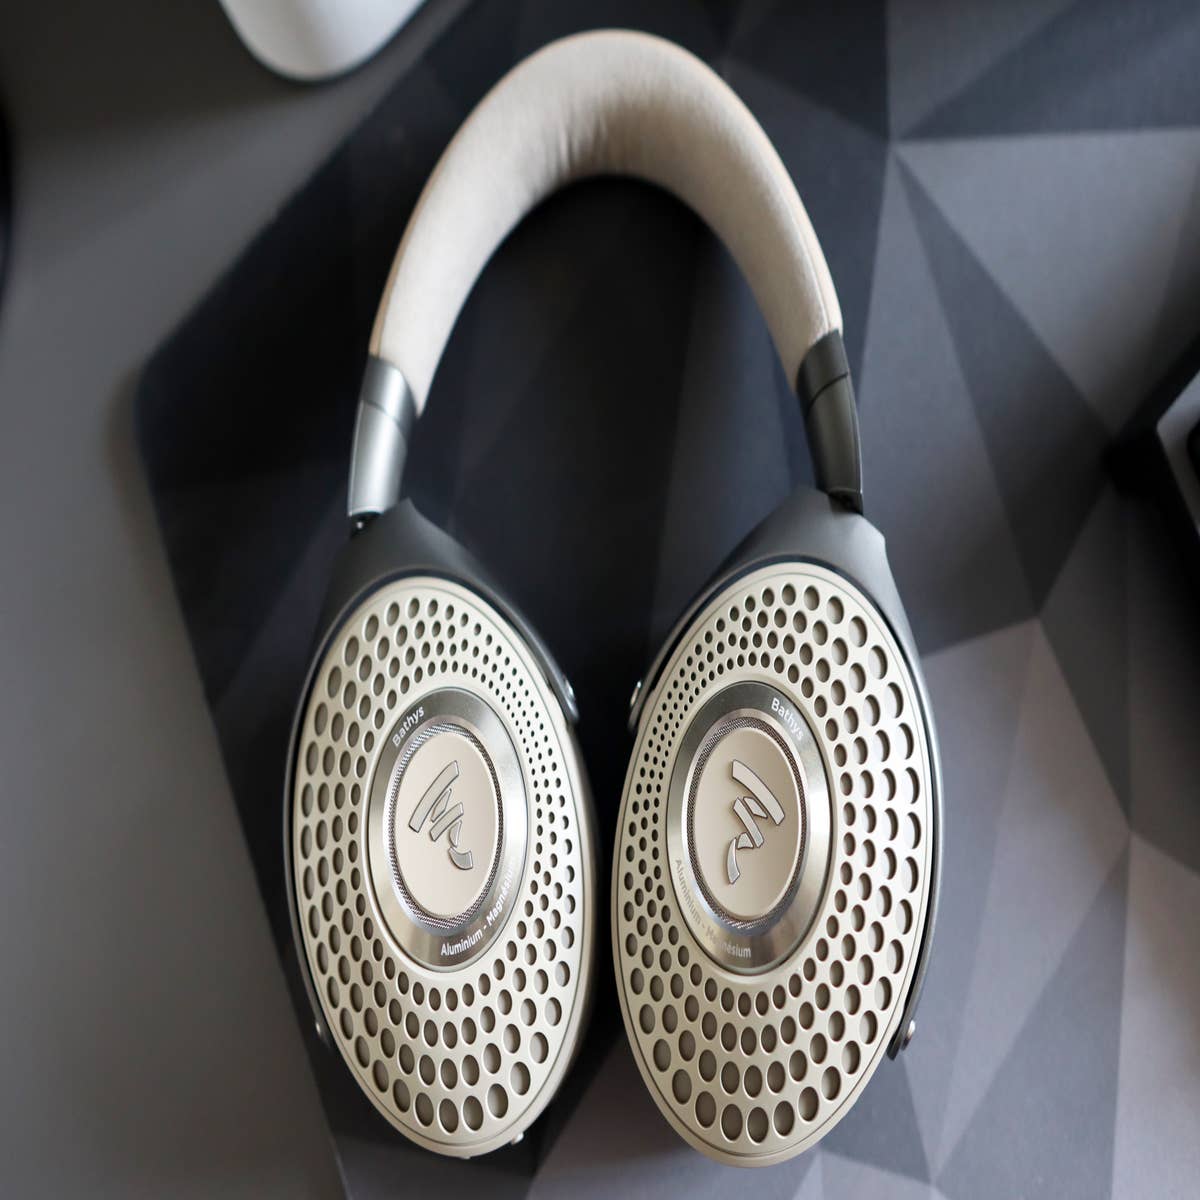 Focal Bathys Headphones: Now Available In Dune Color With New